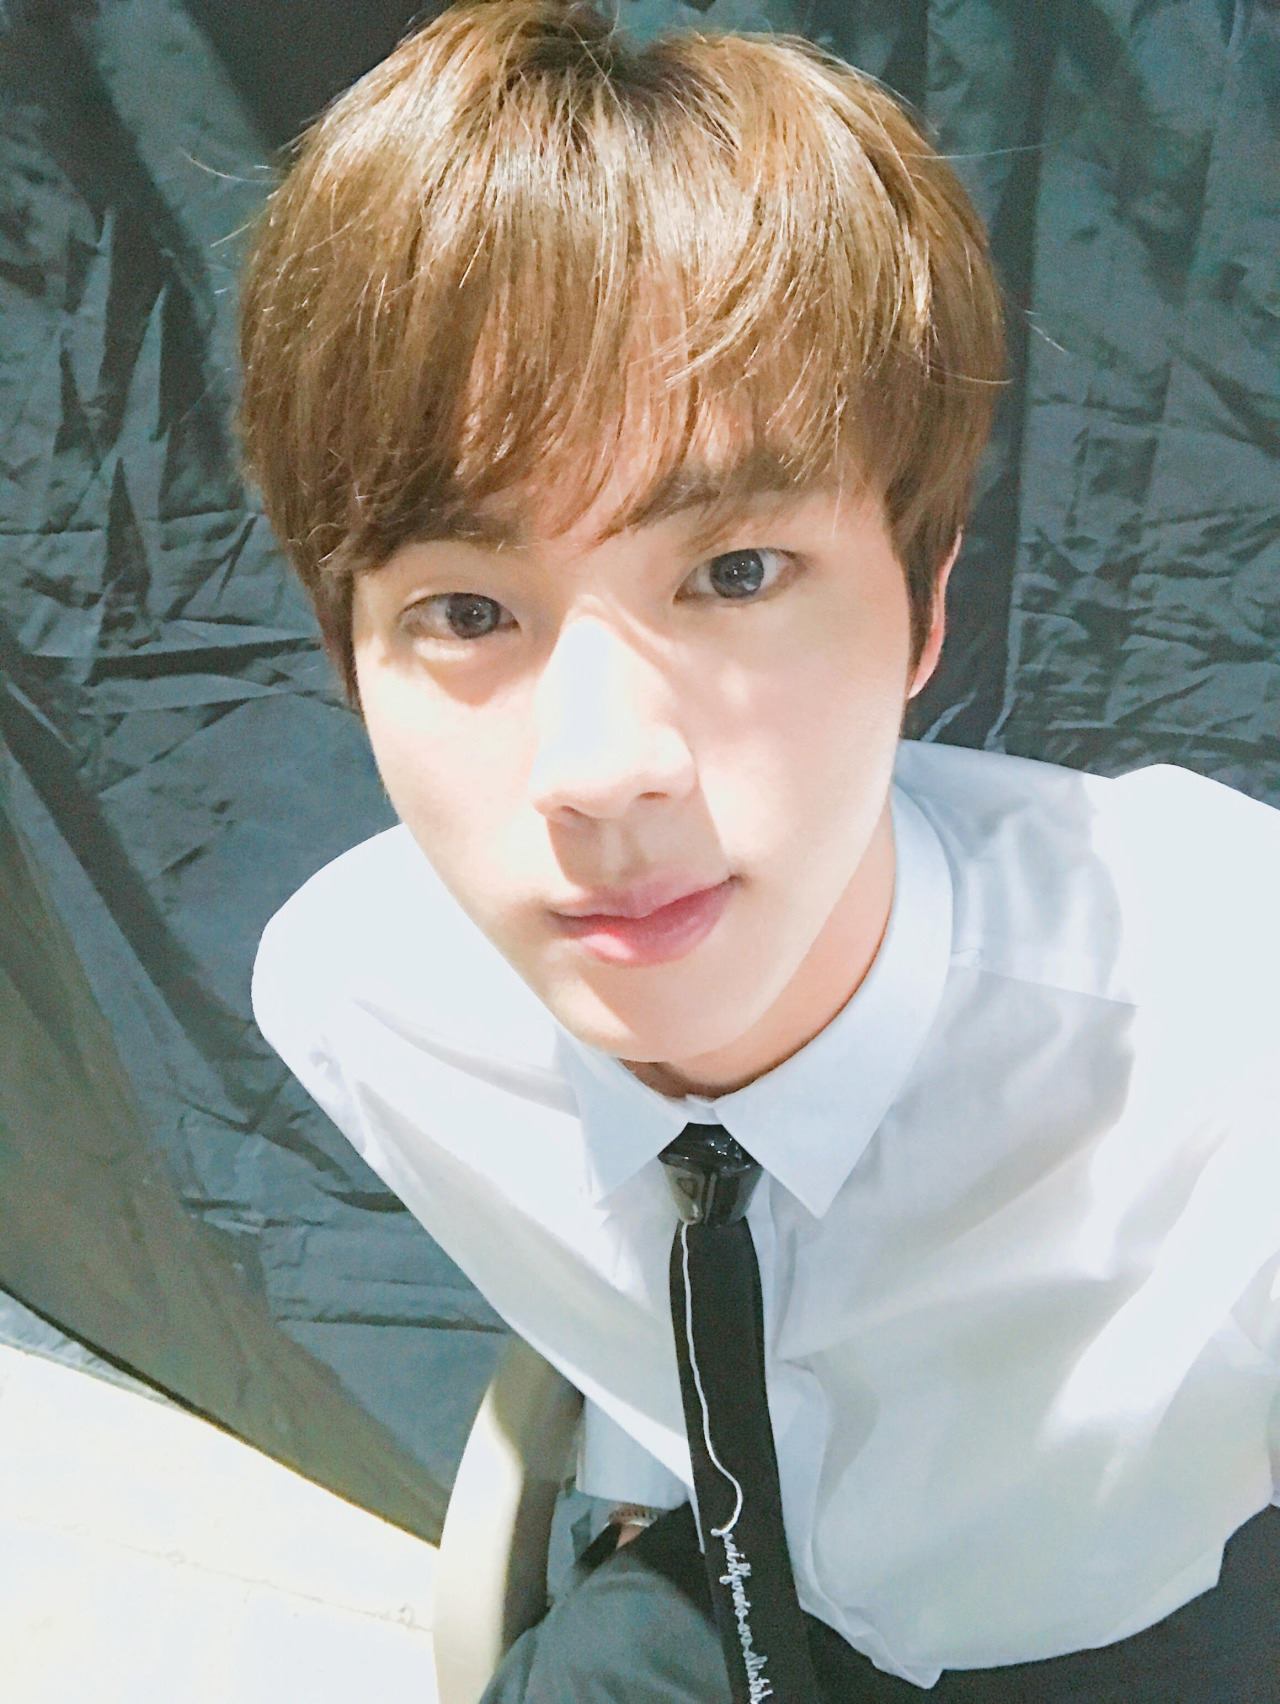  BTS  Jin  Is The Next Idol To Join The Choppy Bangs Trend 